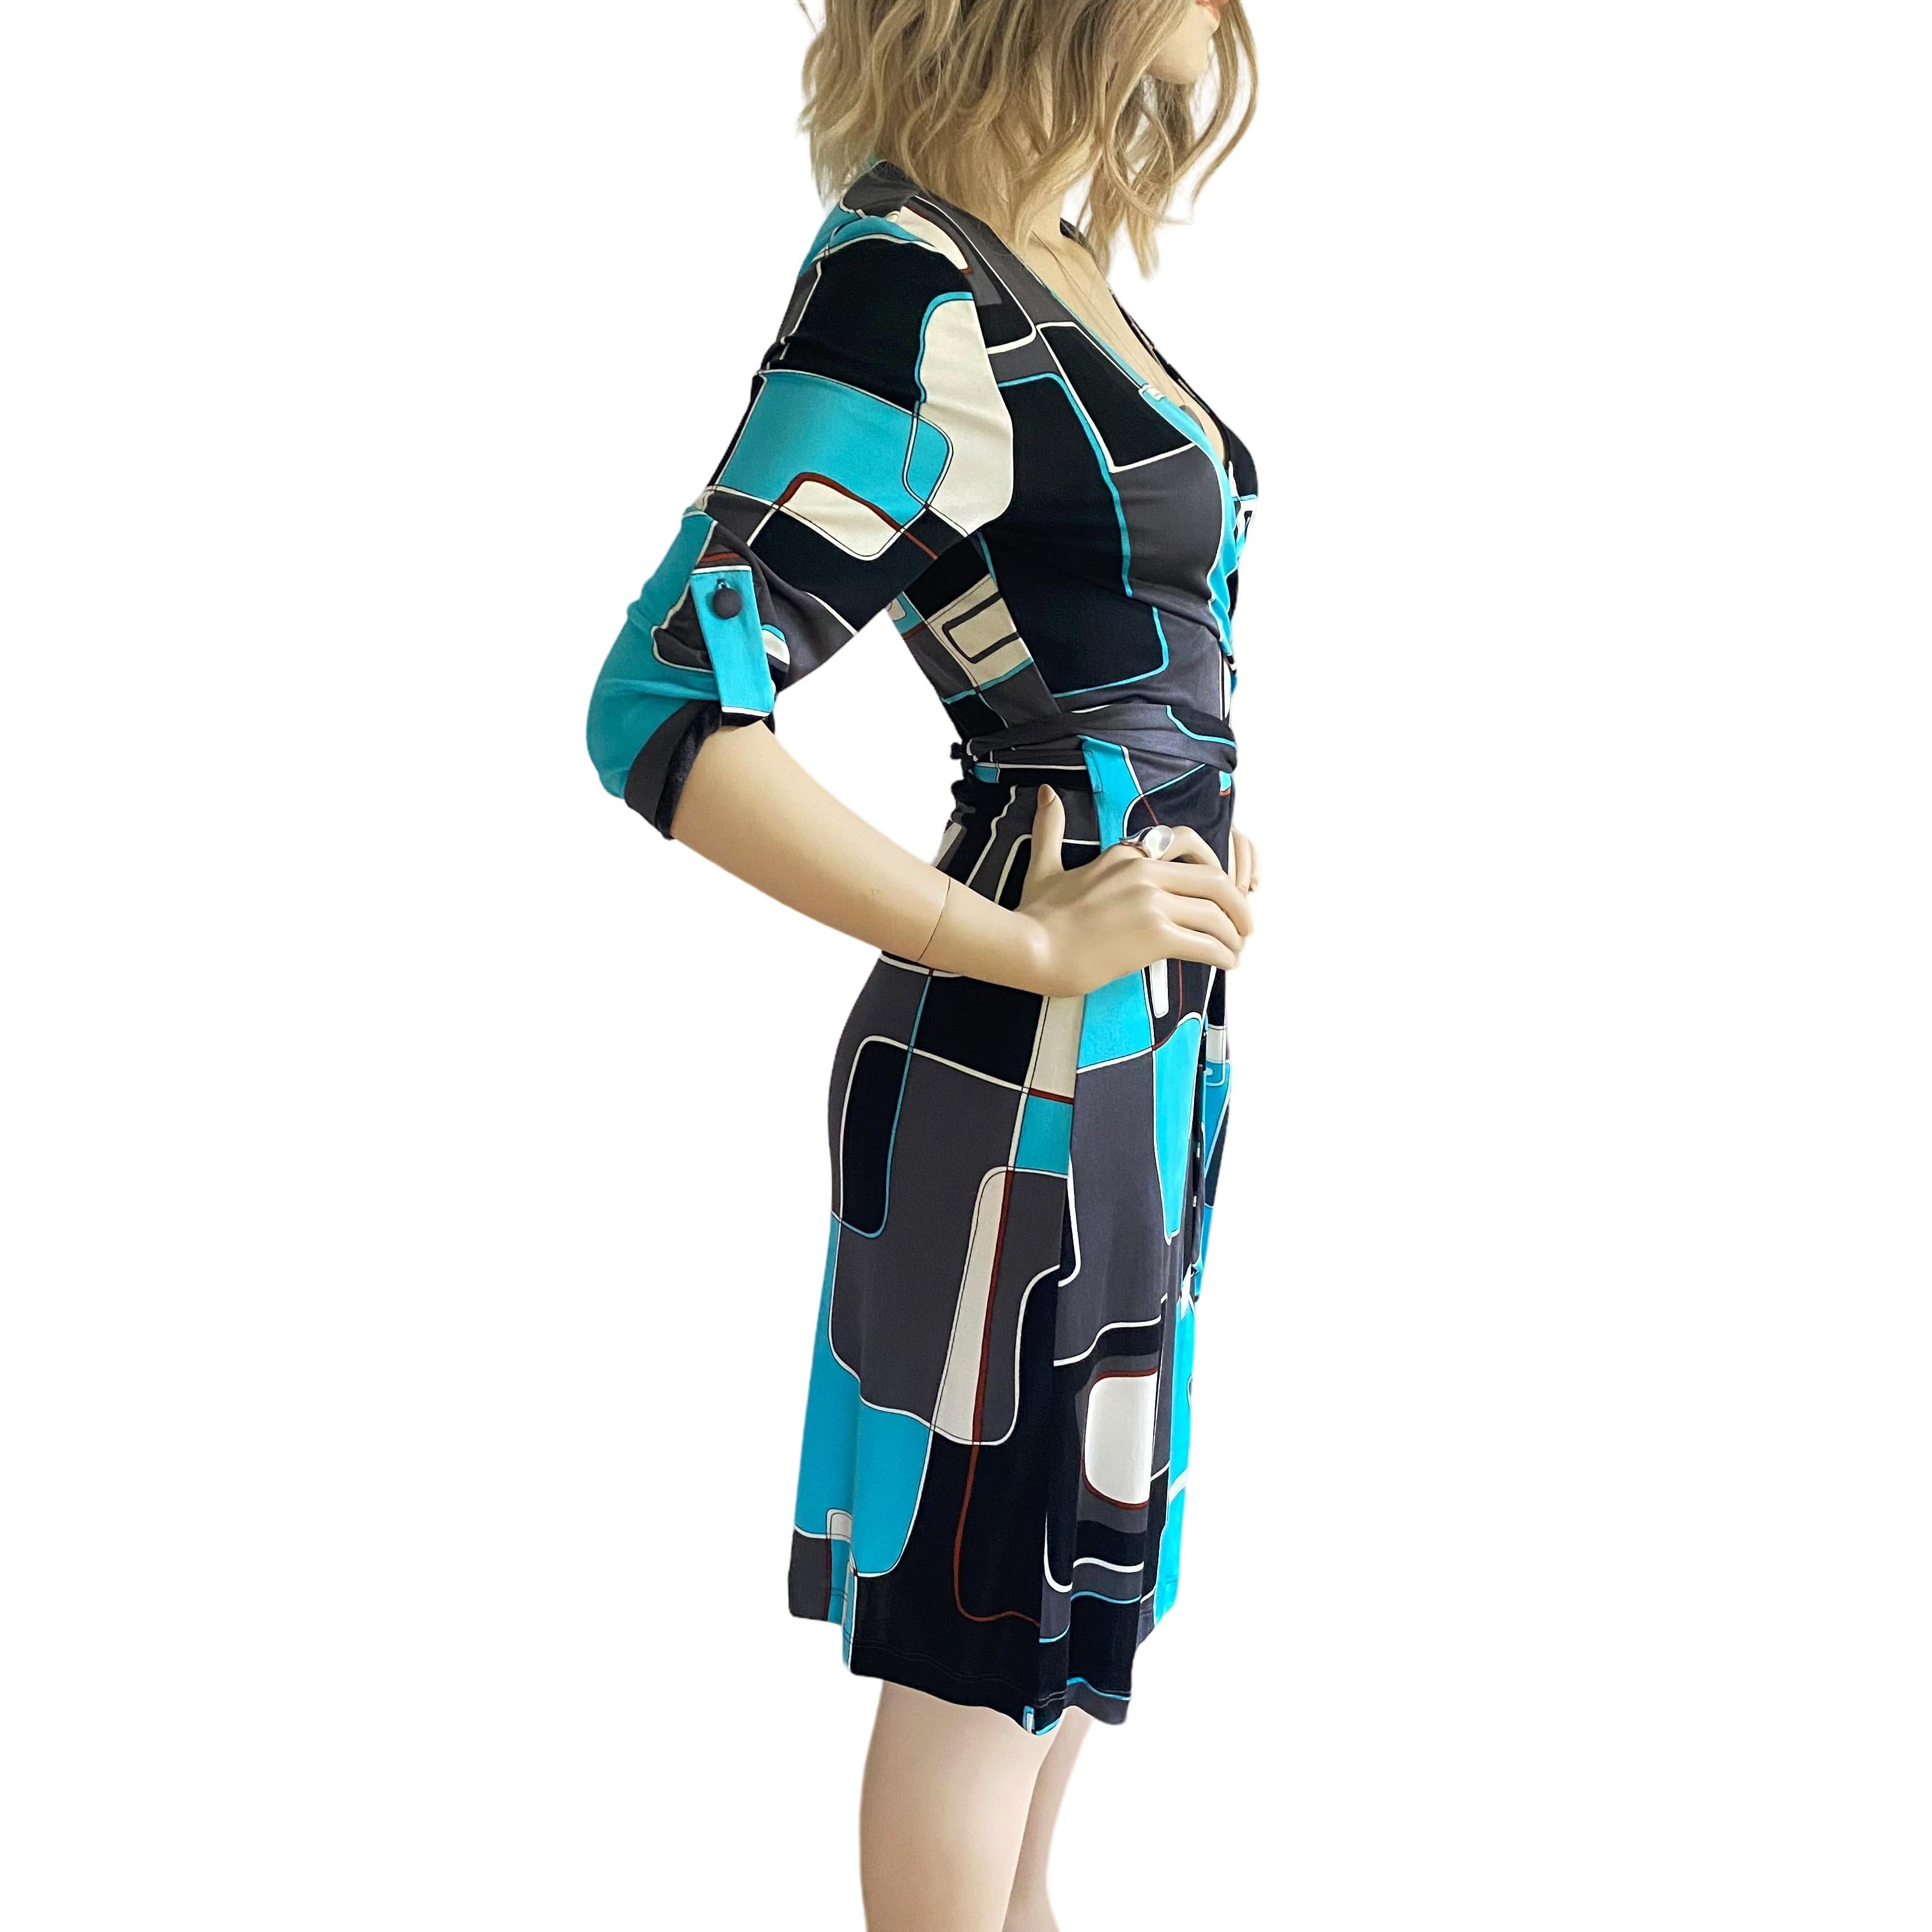 True wrap Dakota dress in Flora's original print.
Colors in print: black, gray, turquoise, and alabaster.
Rolled button sleeves add a touch of casual authority.
Available in sizes 4 and 8
FLORA KUNG dresses are made in premiere quality,